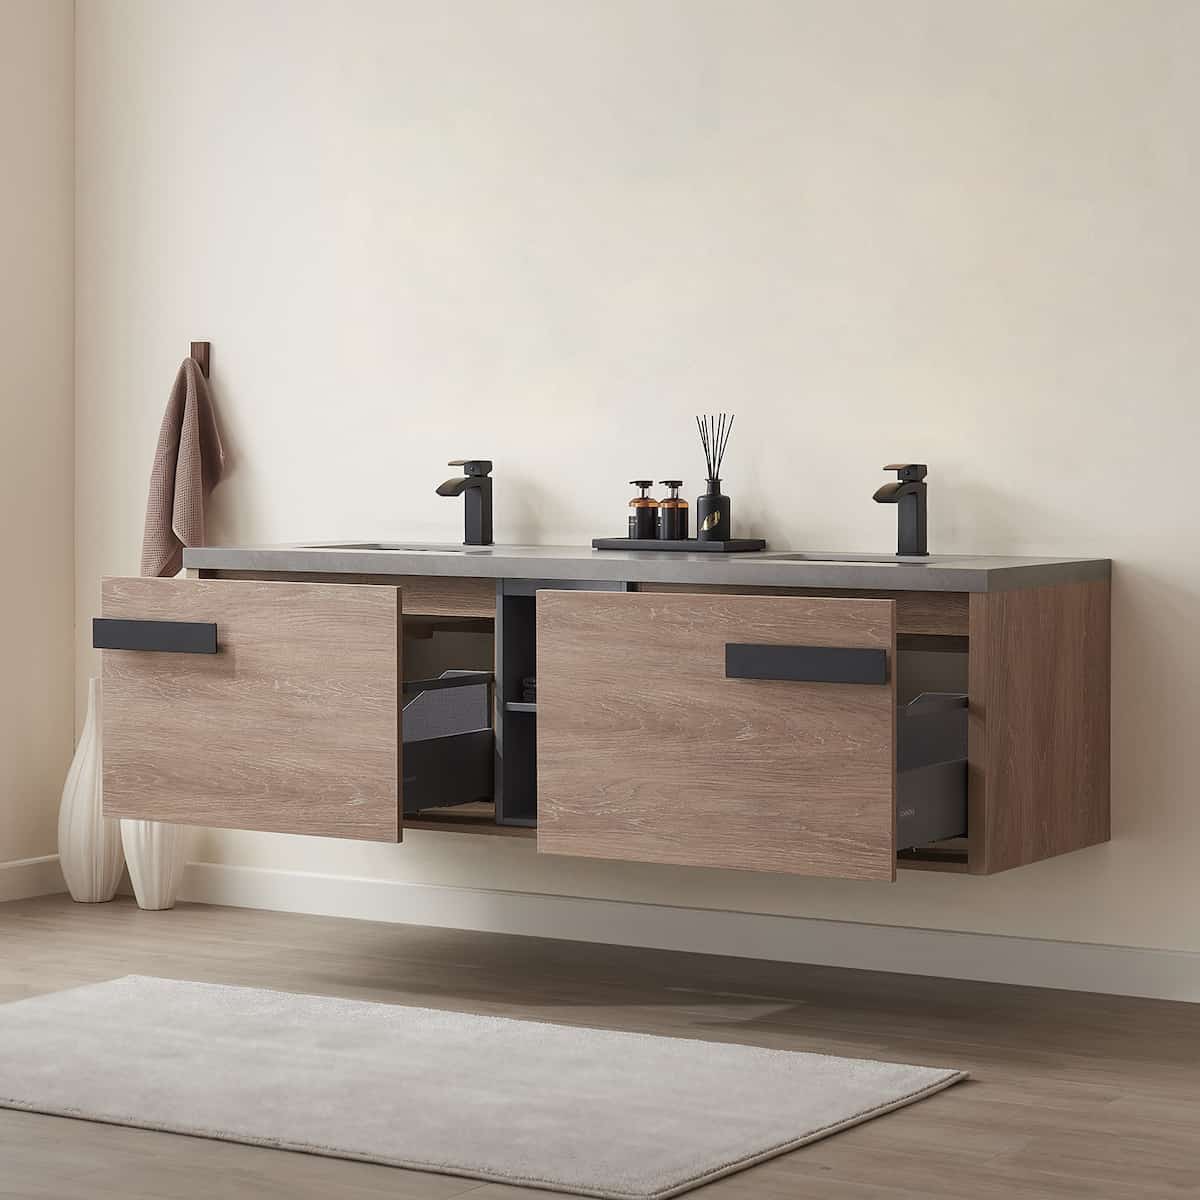 Vinnova Carcastillo 72 Inch Wall Mount Double Sink Bath Vanity in North American Oak with Grey Sintered Stone Top Without Mirror Drawers 703272-NO-WK-NM #mirror_without mirror